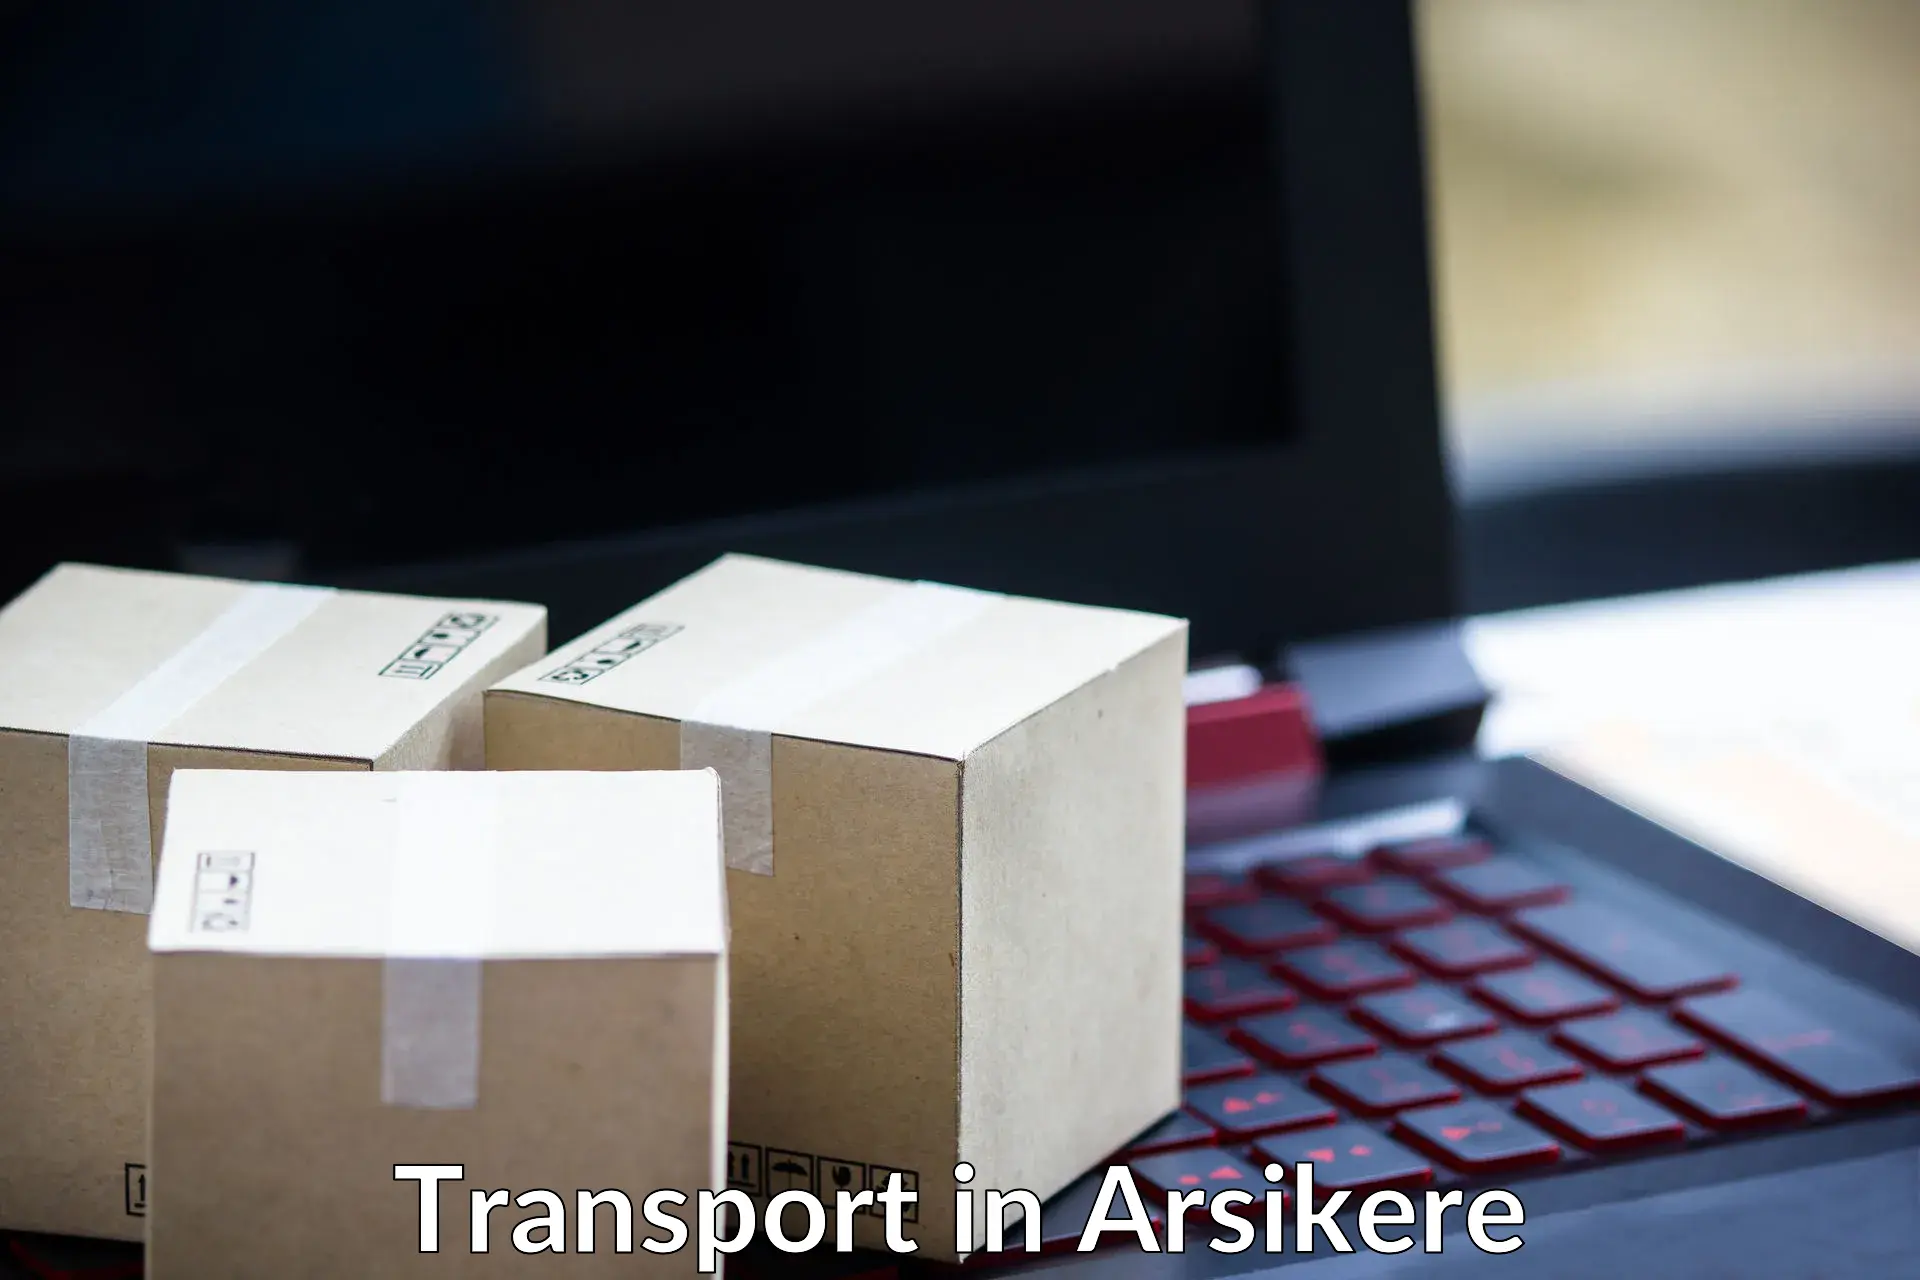 Road transport services in Arsikere